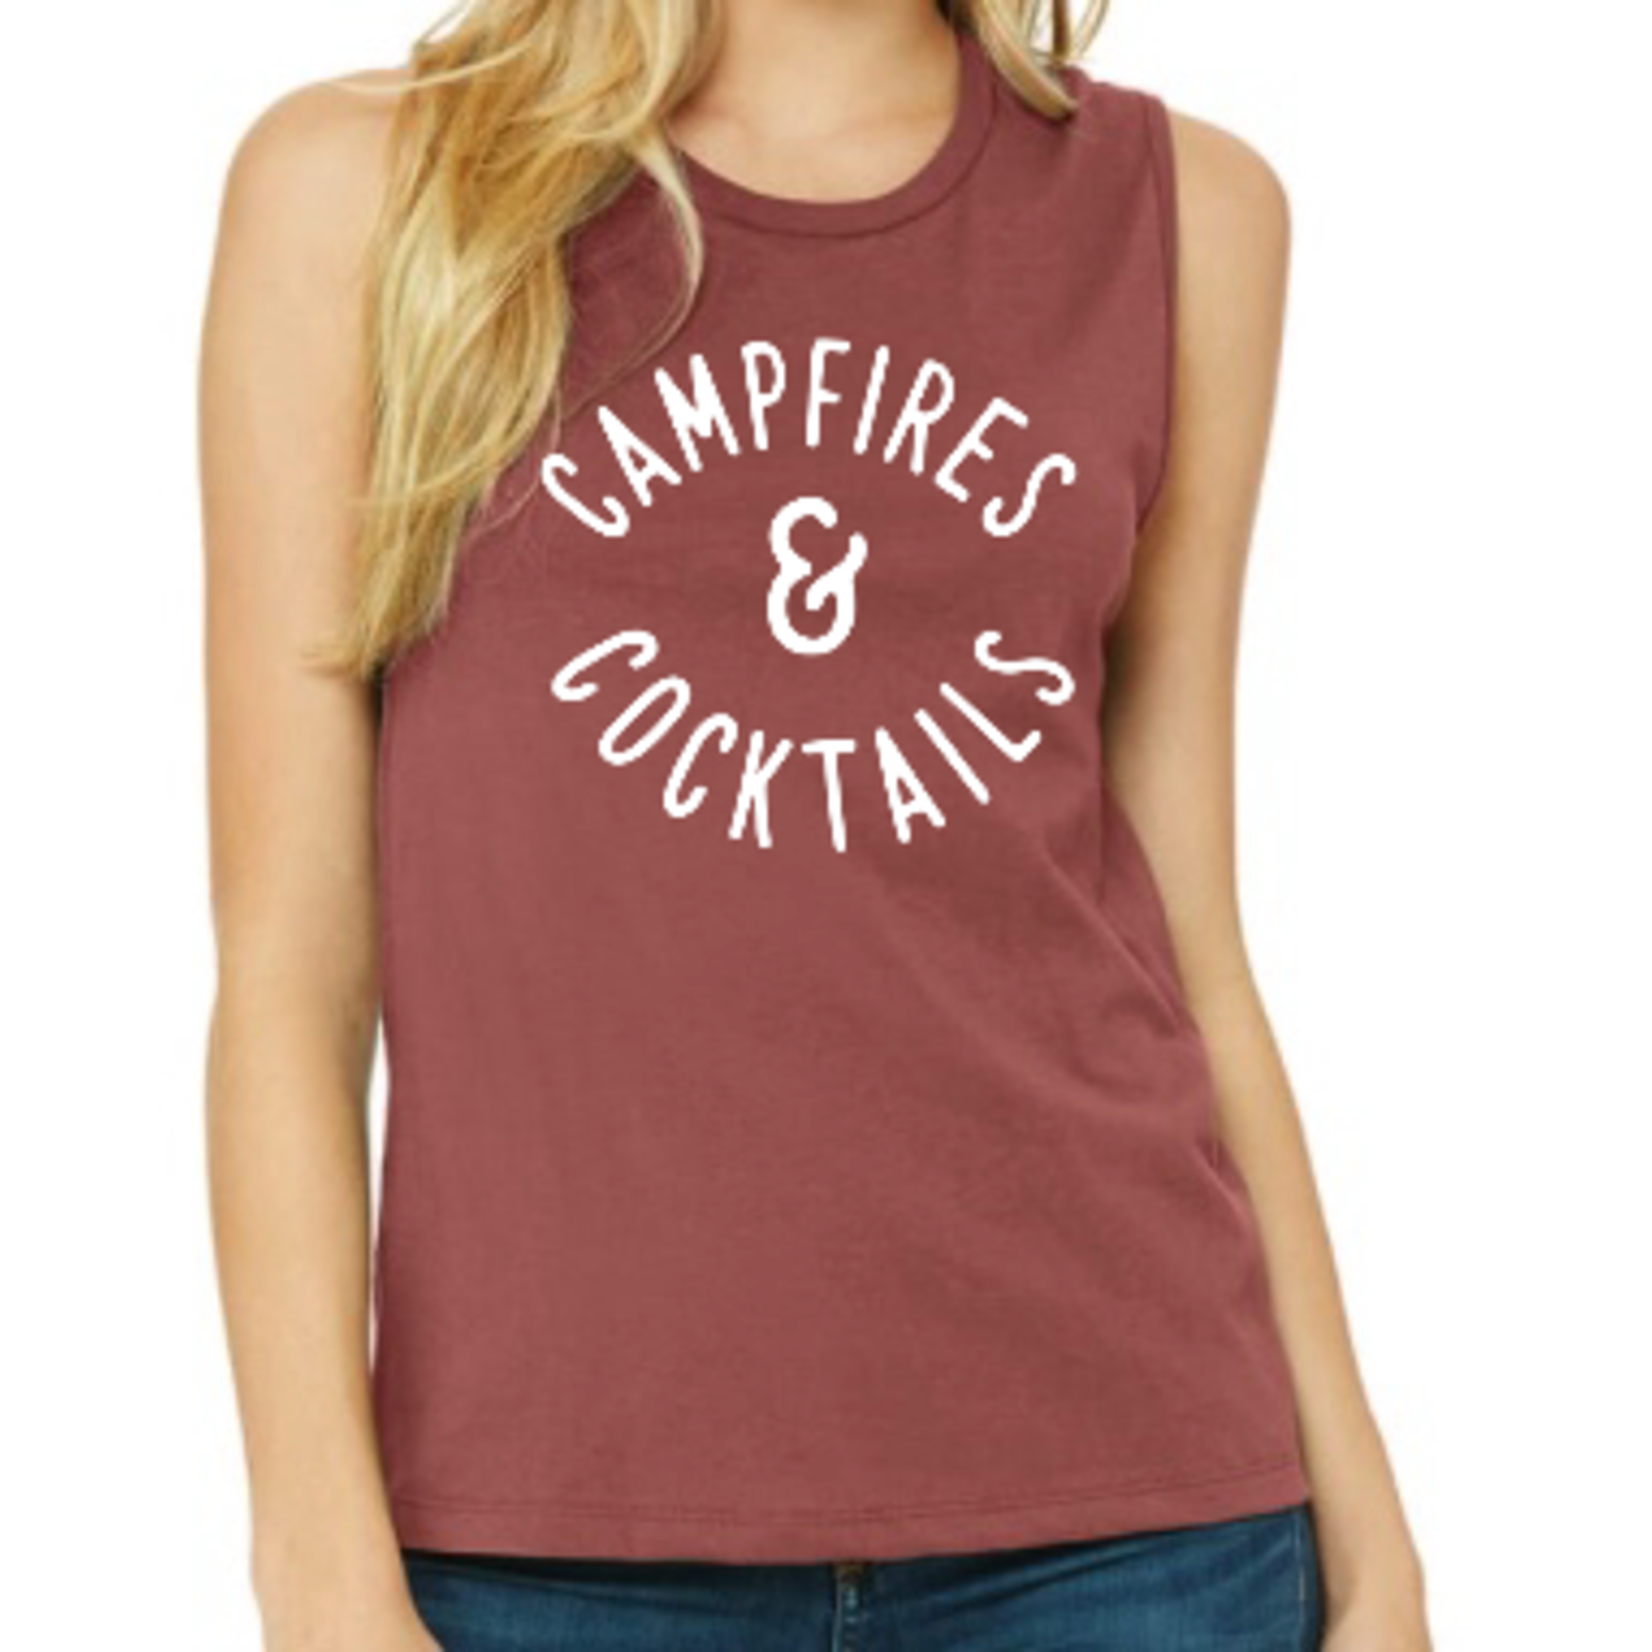 Women's muscle tank: Campfire & Cocktails